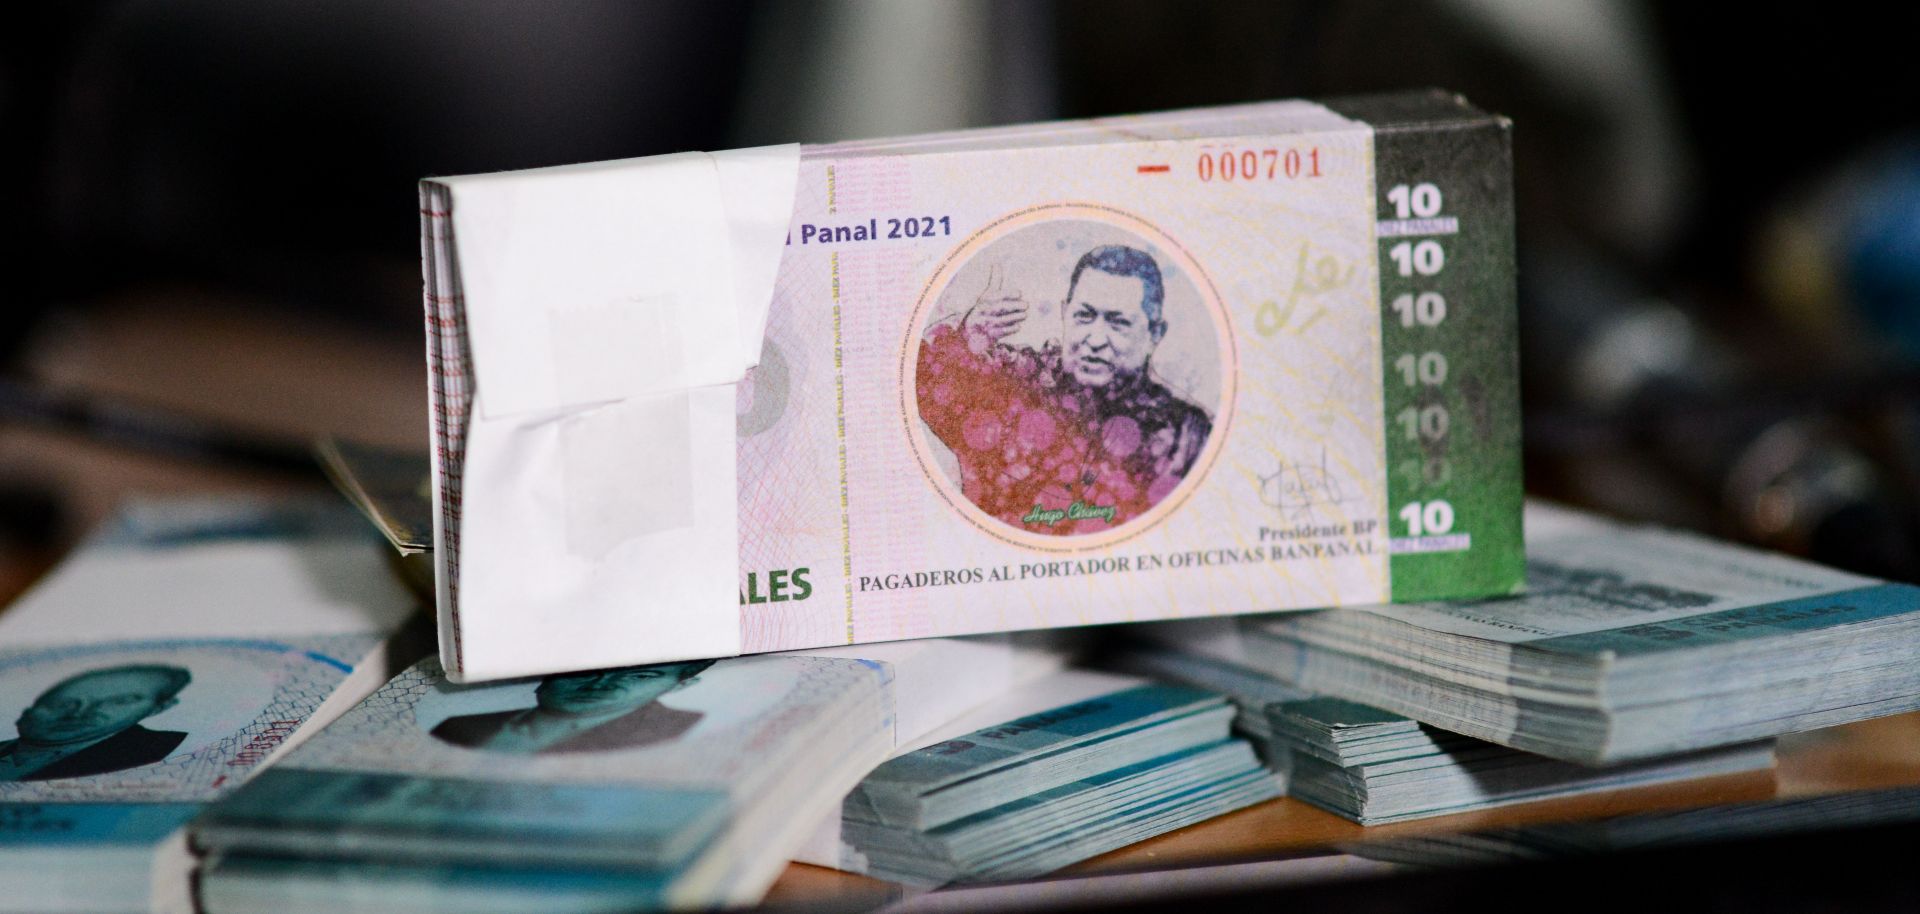 A collective in a hilltop shantytown in Caracas created its own currency, the panal, to fight chronic shortages of cash in inflation-ridden Venezuela.